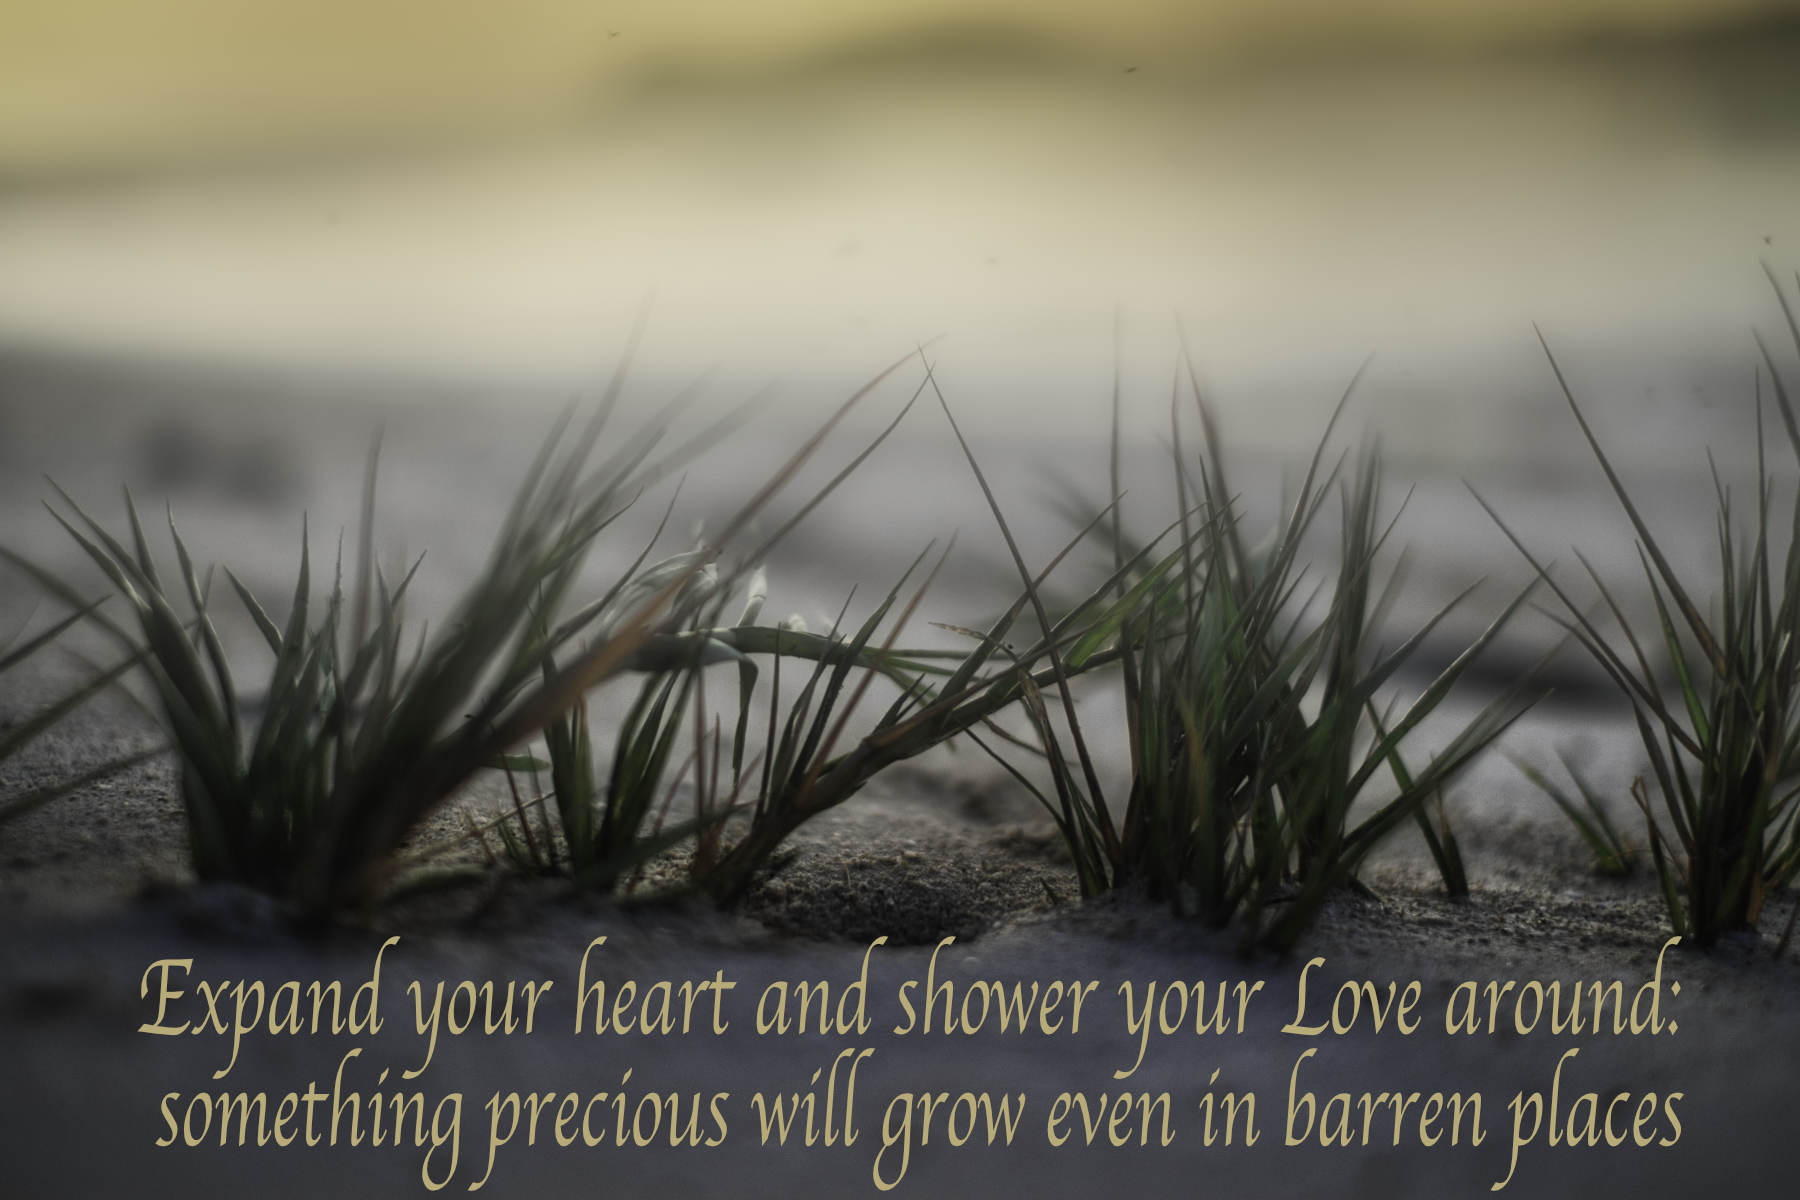 Expand your heart and shower your Love around: something precious will grow even in barren places